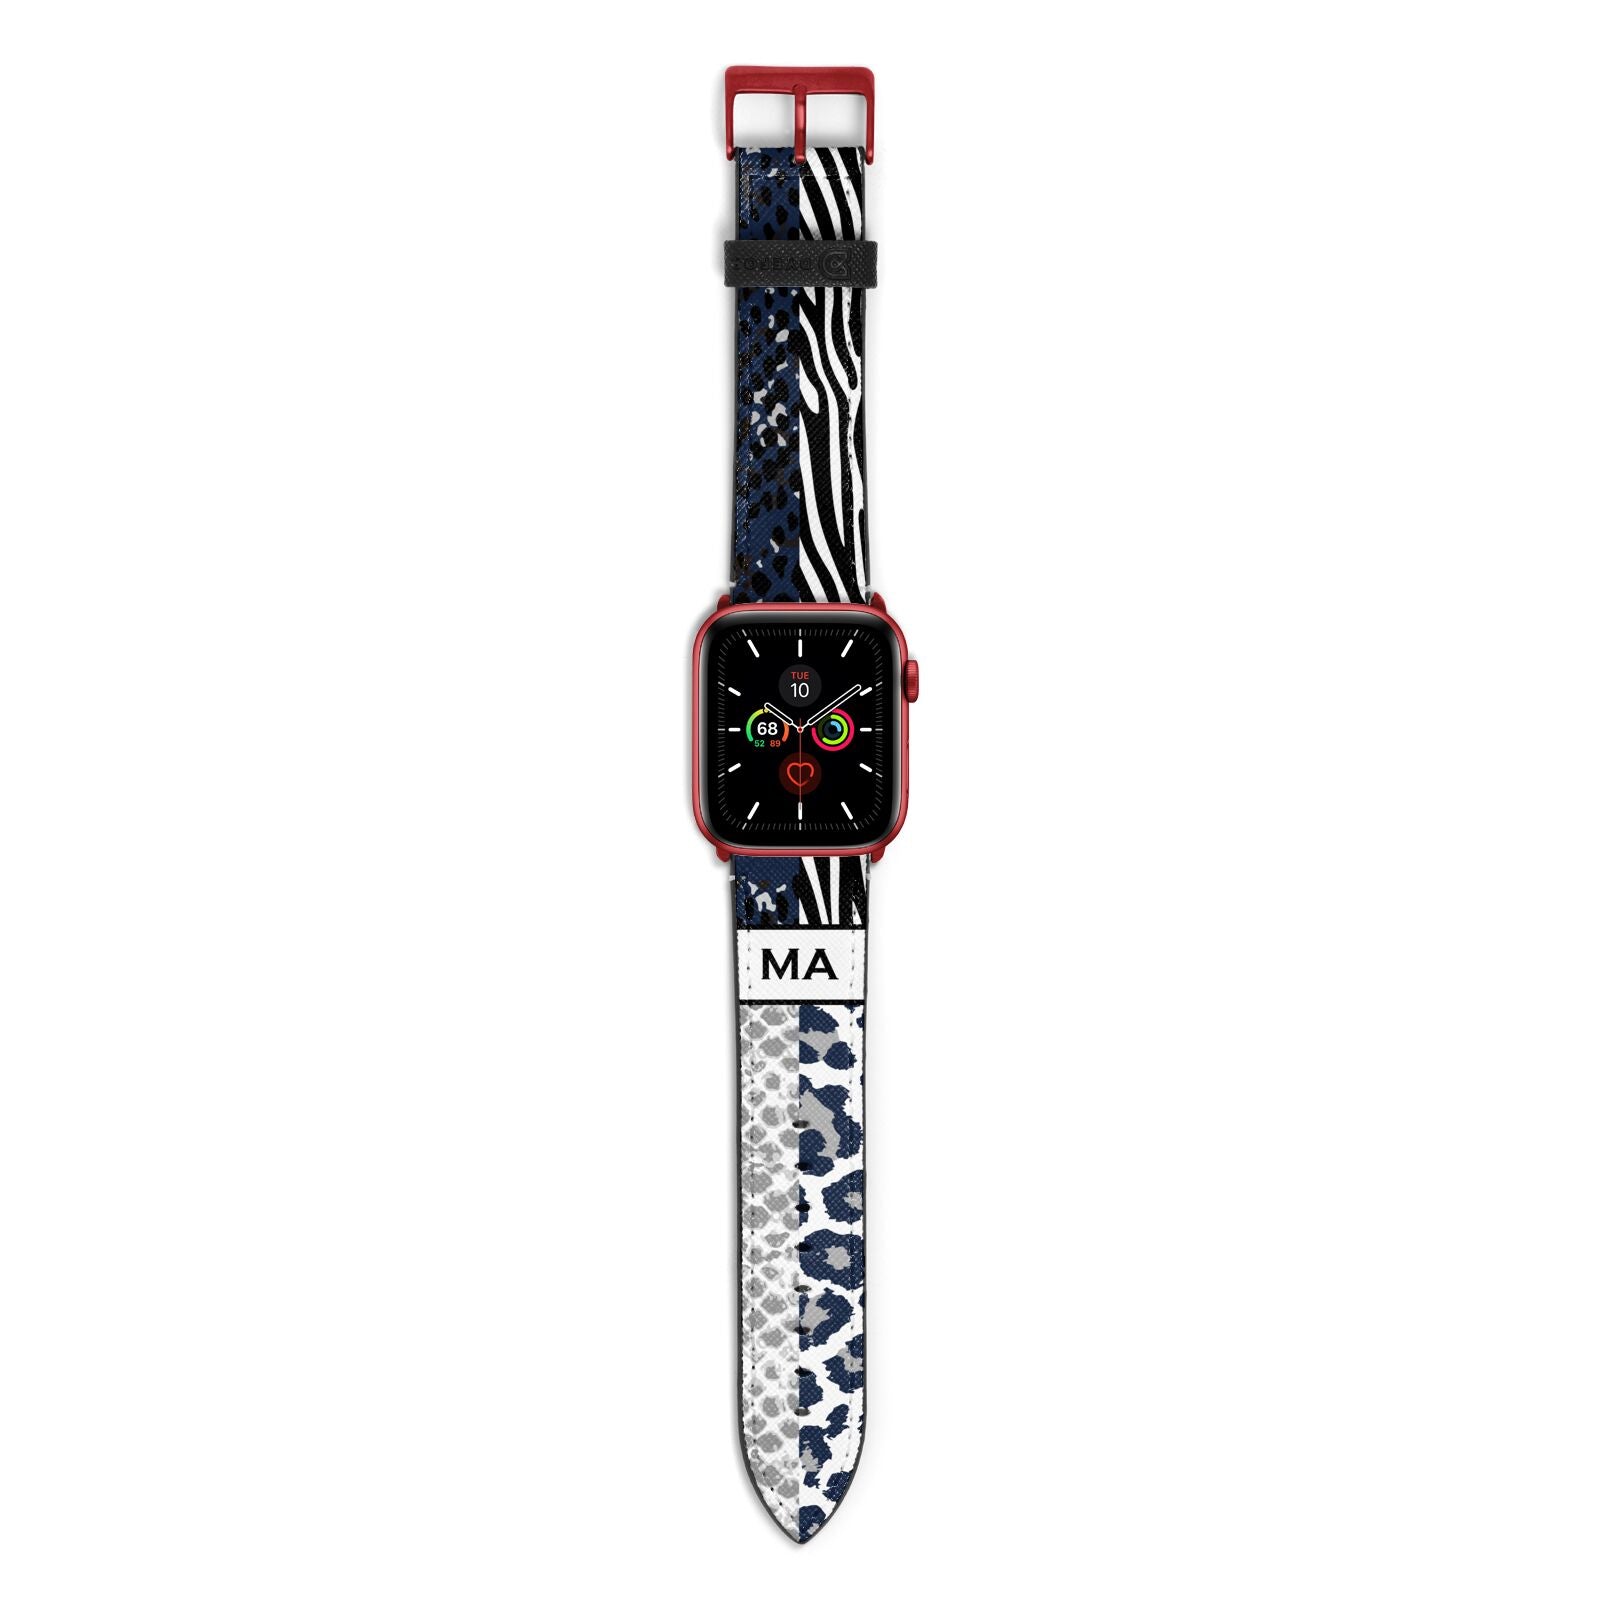 Personalised Animal Print Apple Watch Strap with Red Hardware